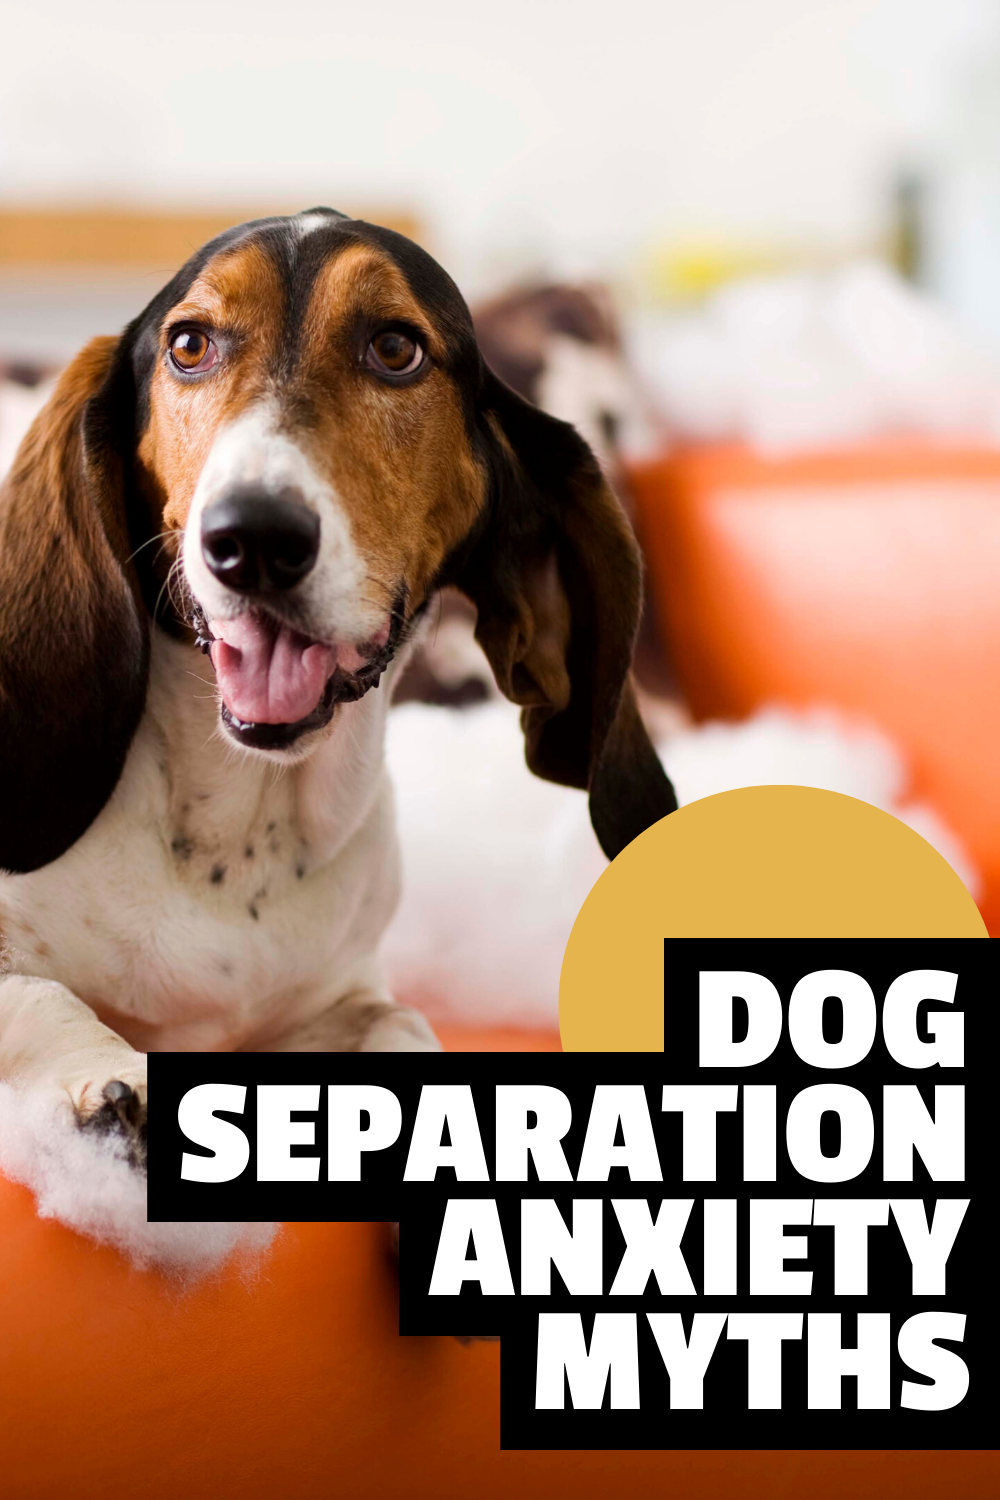 7 myths about dog separation anxiety